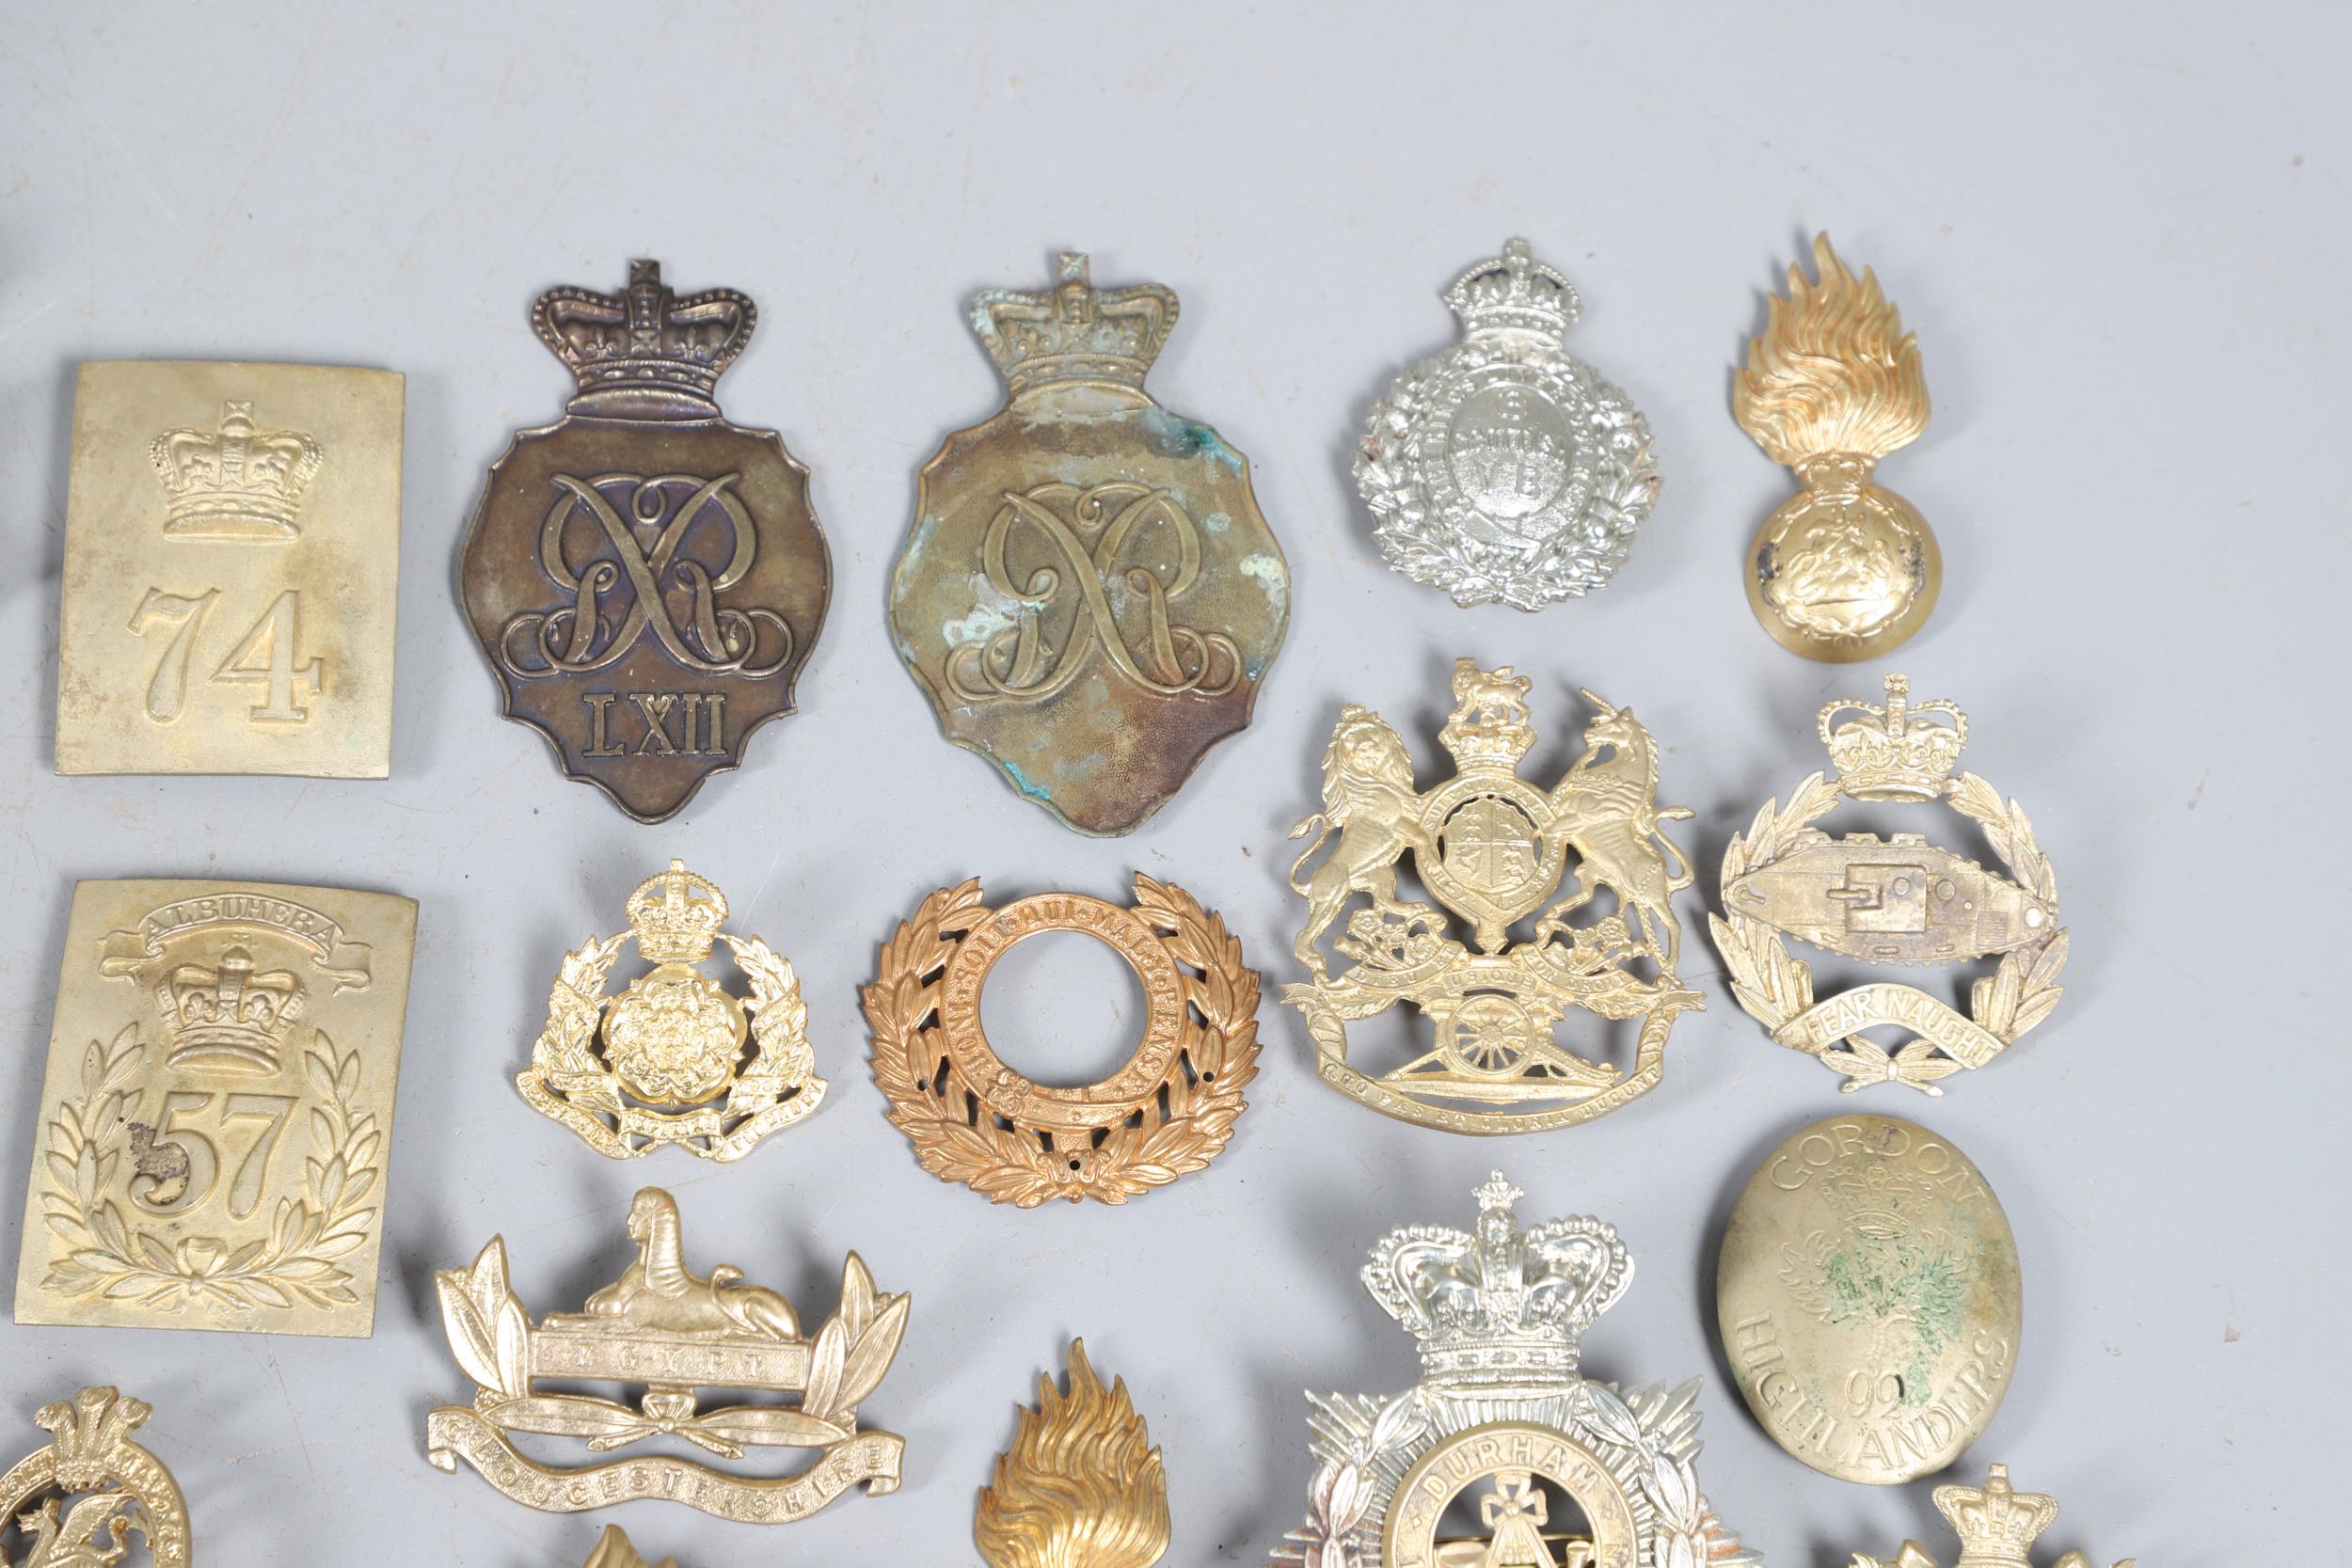 A COLLECTION OF VICTORIAN STYLE HELMET PLATES AND OTHER BADGES. - Image 2 of 10